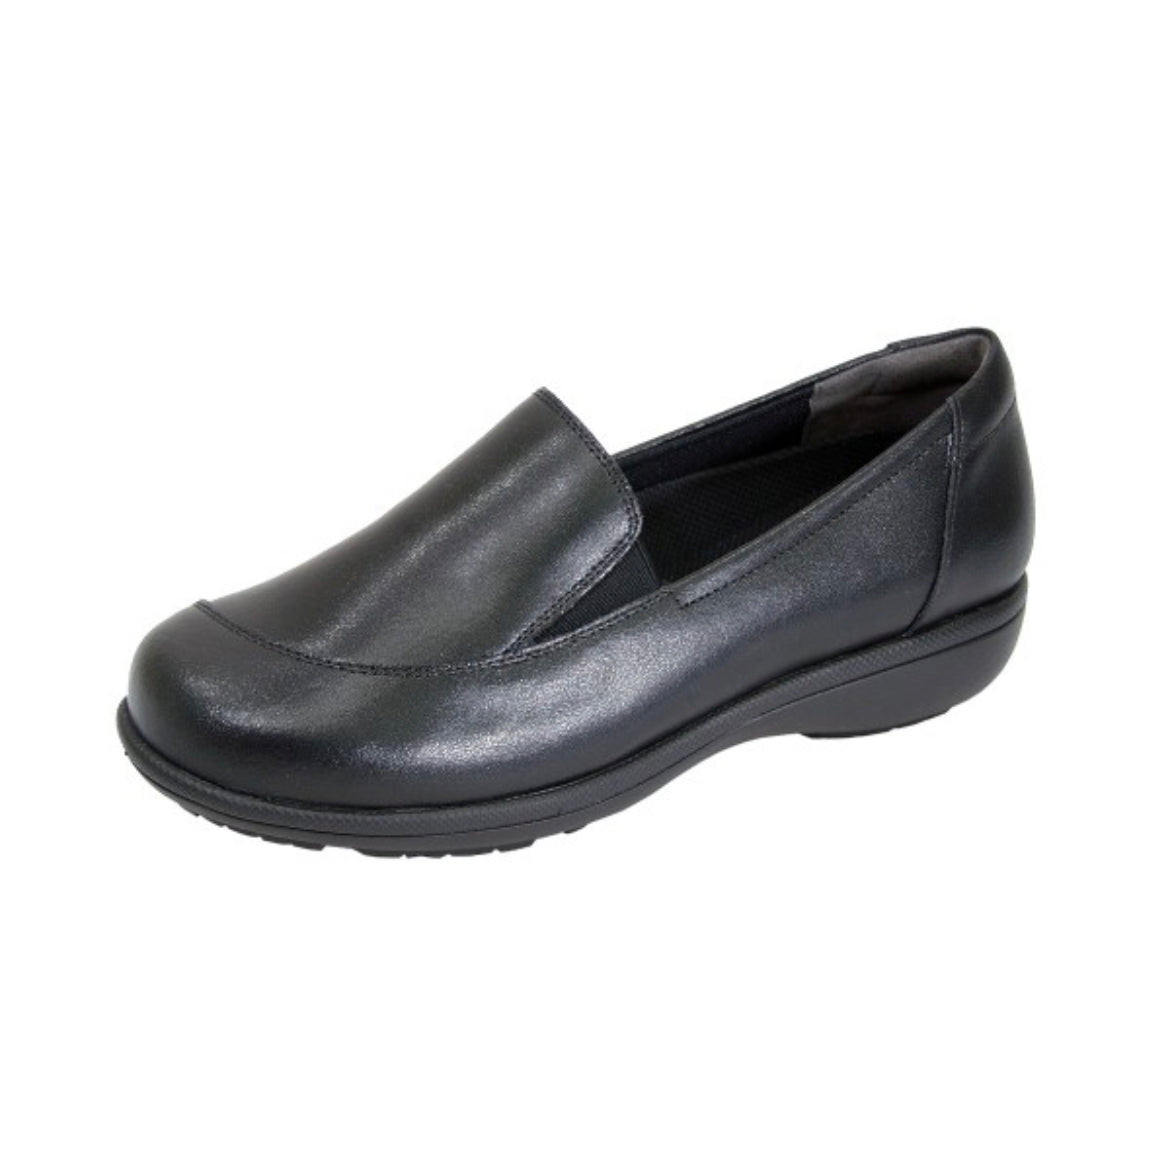 Usher Church Shoes | Church suits for less